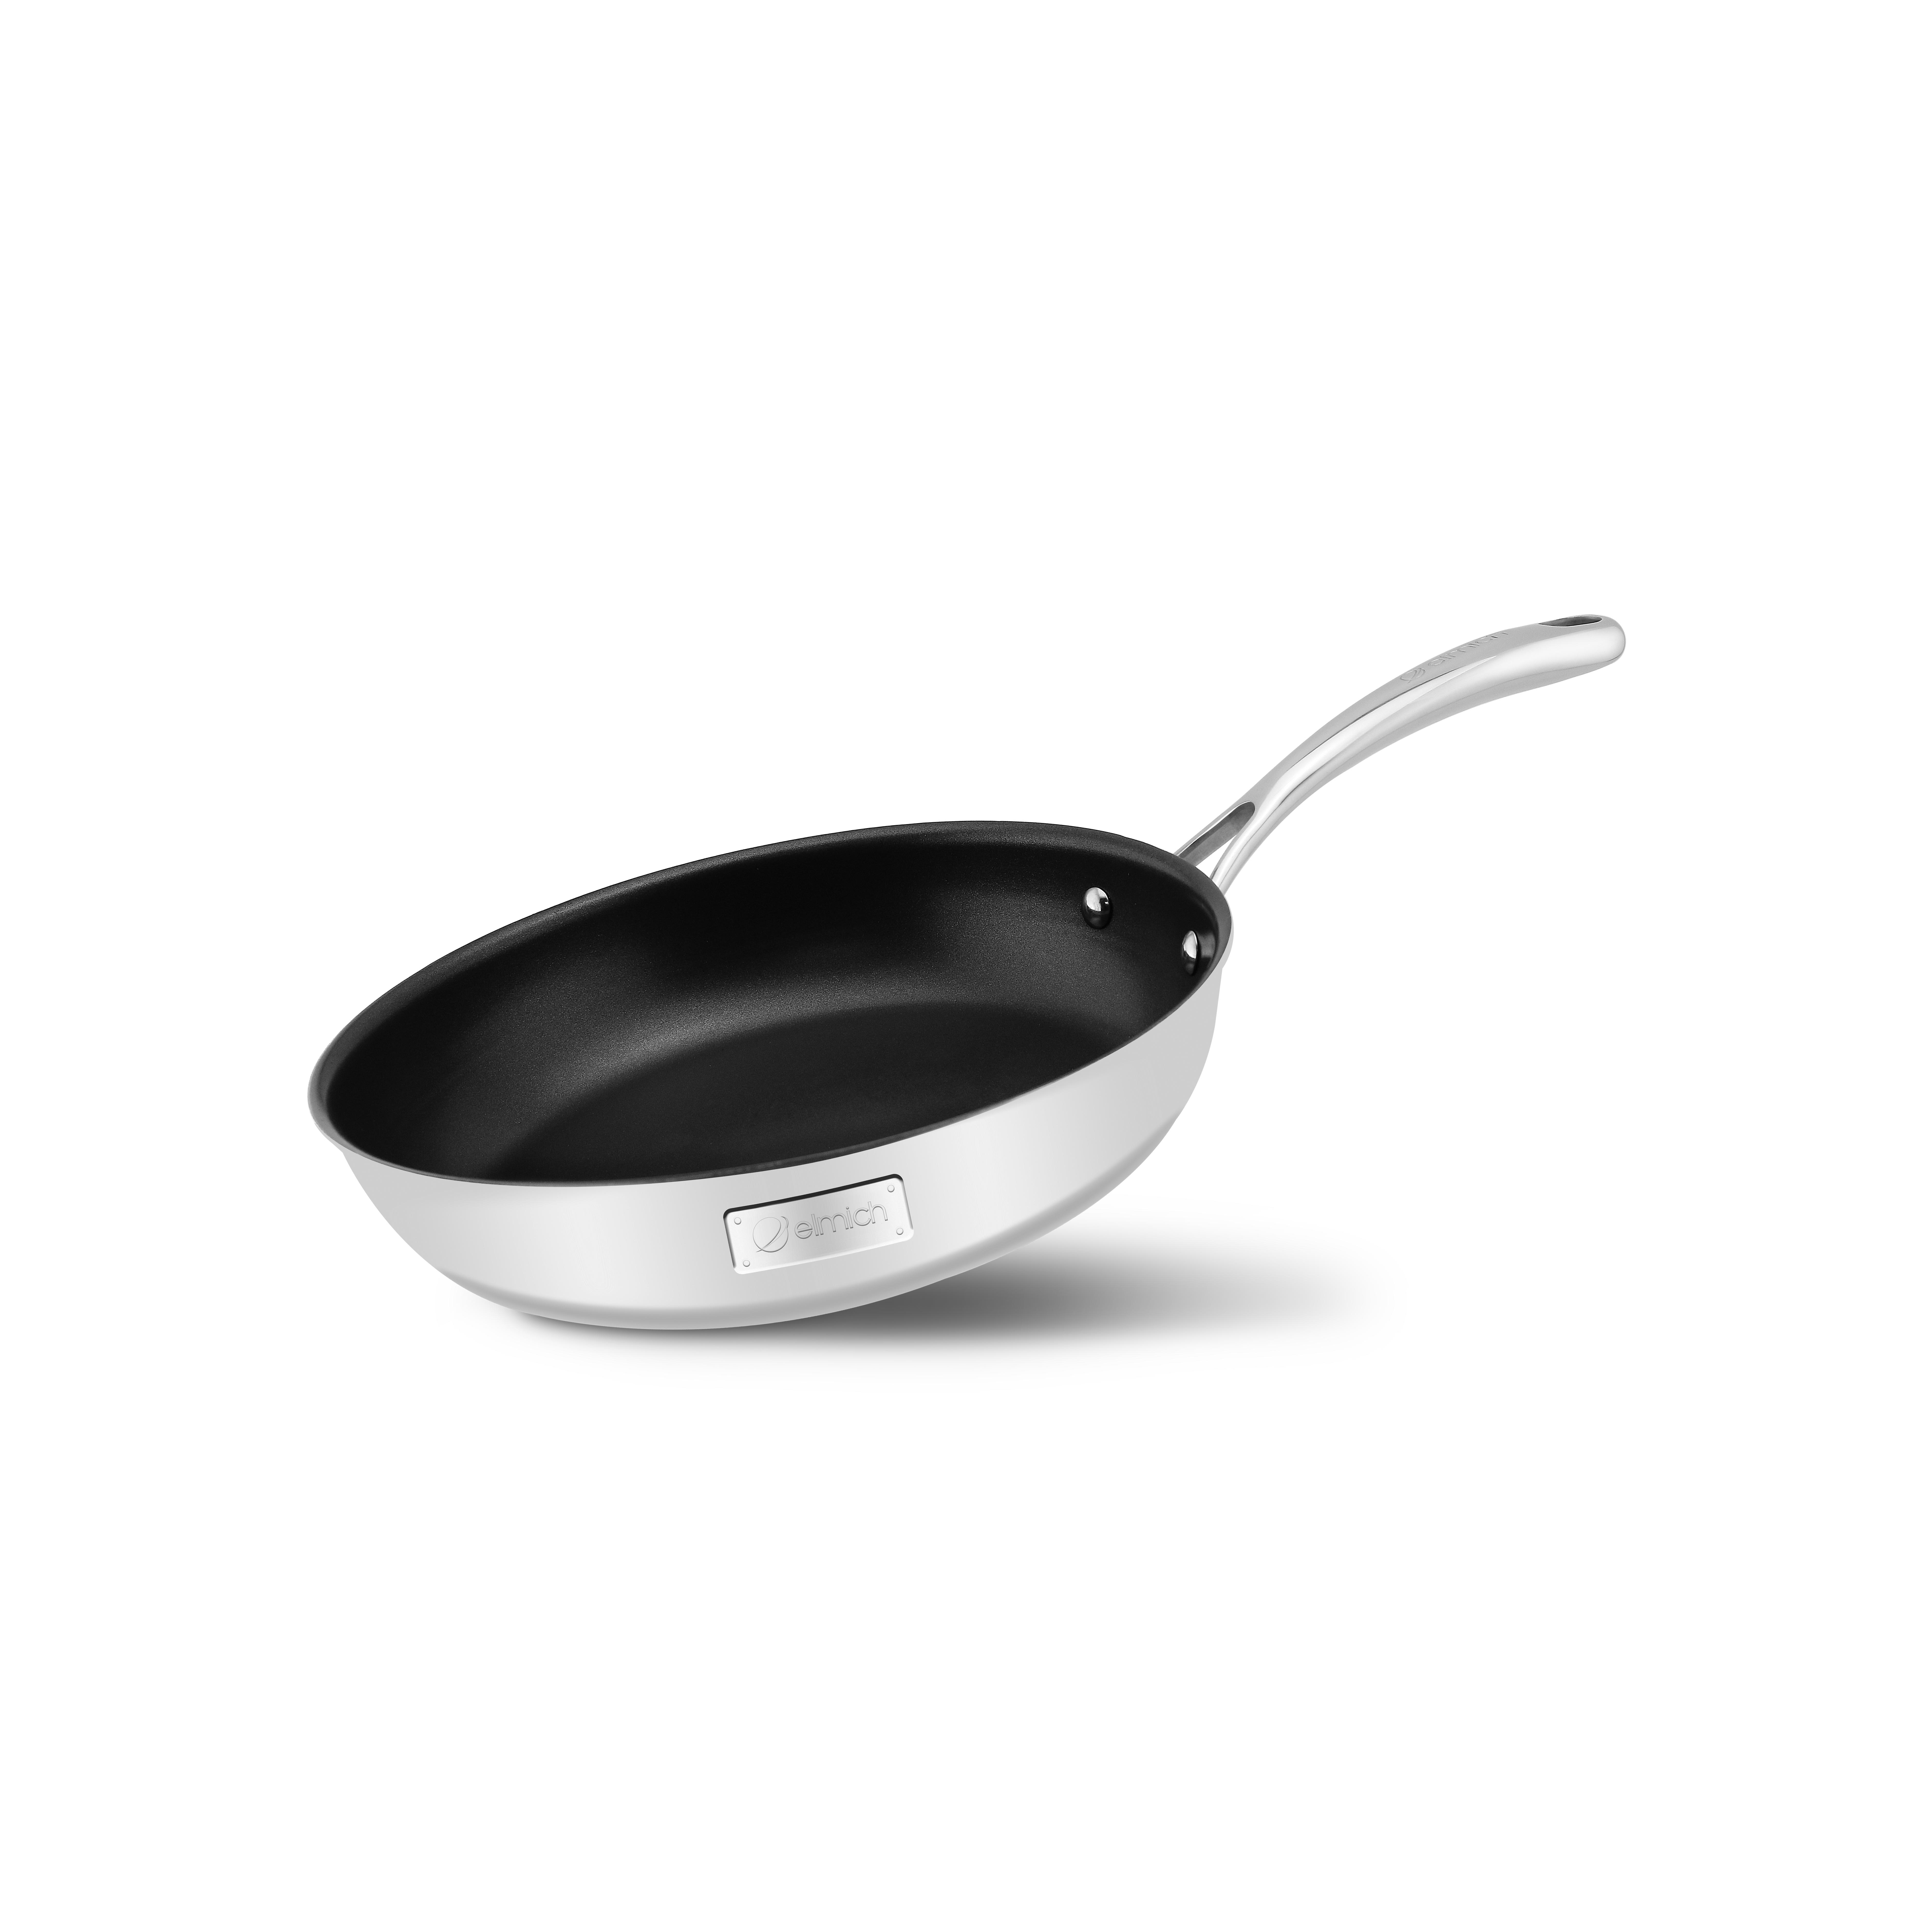 High-grade stainless steel skillet 2 layers of Tri-Max 20cm instant bottom